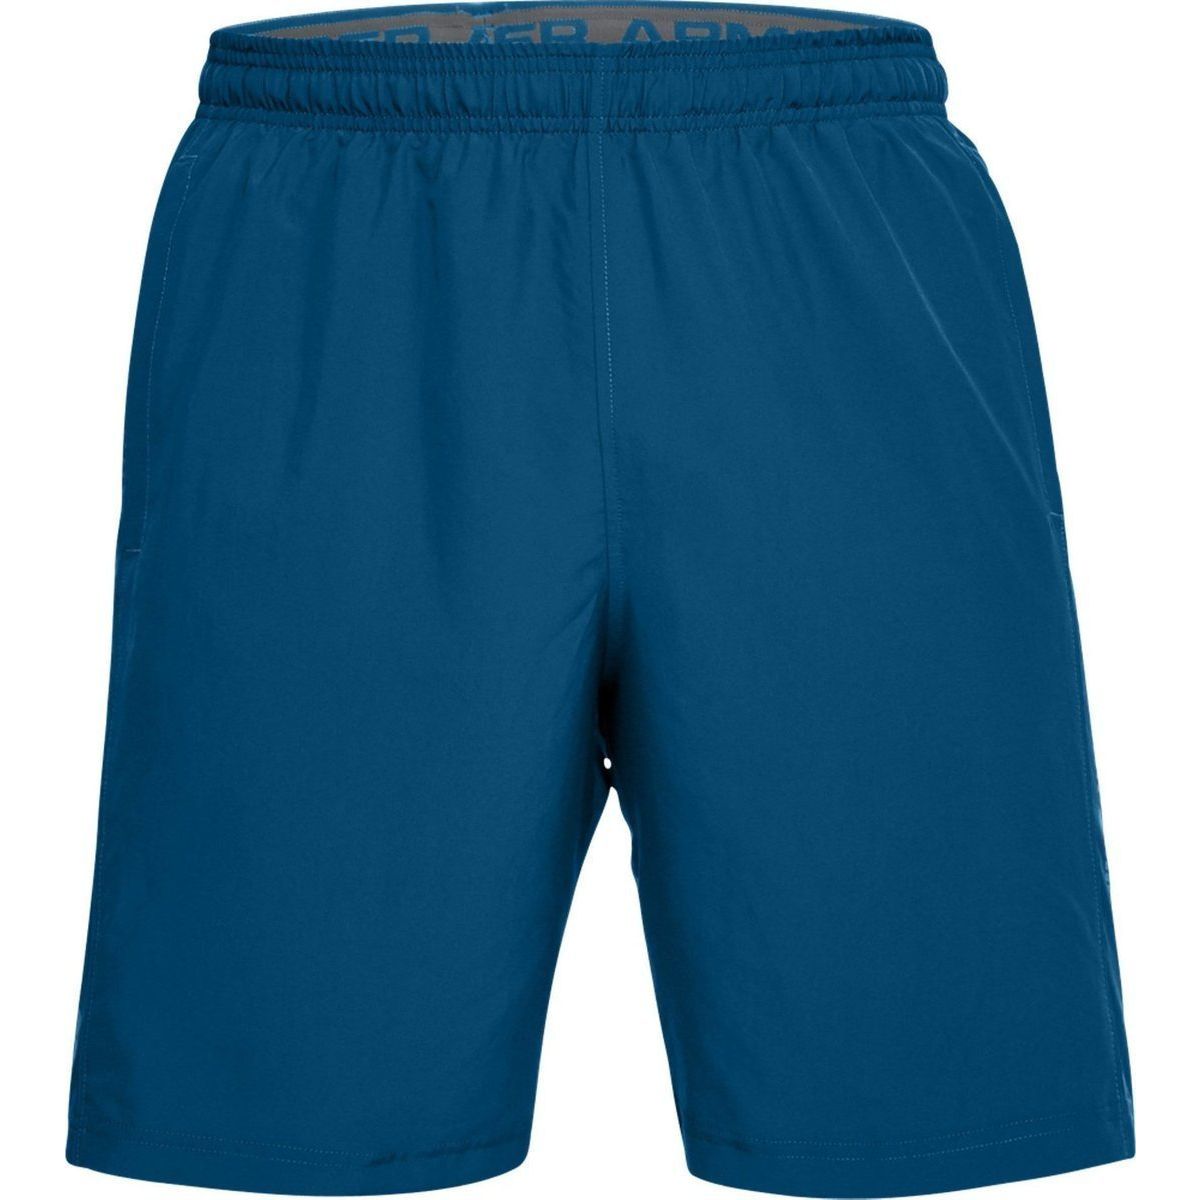 Under Armour Woven Graphic Men's Shorts 1309651-487